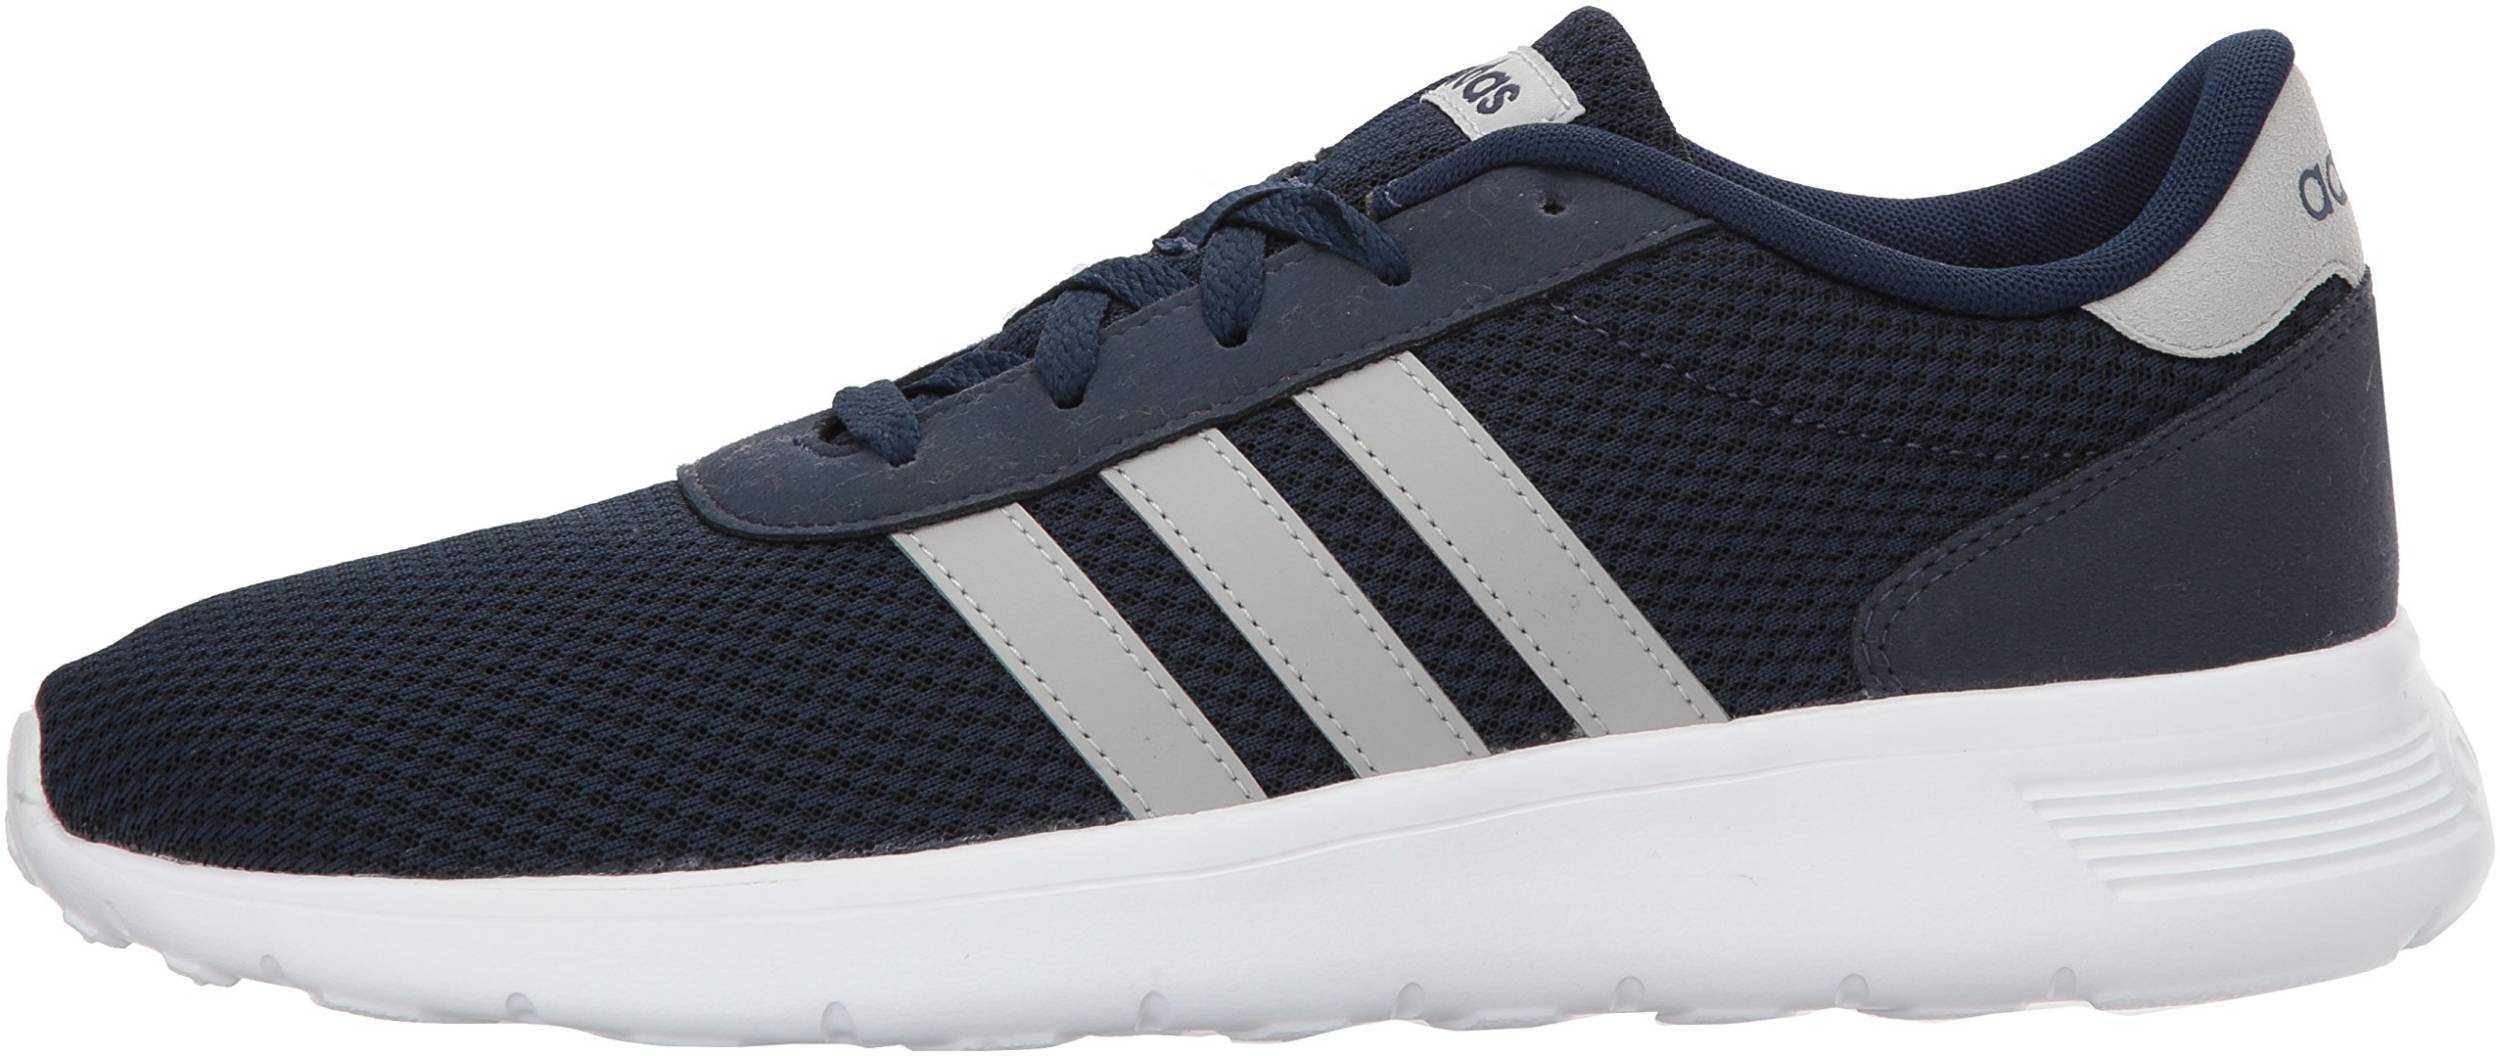 Only $30 + Review of Adidas Lite Racer 